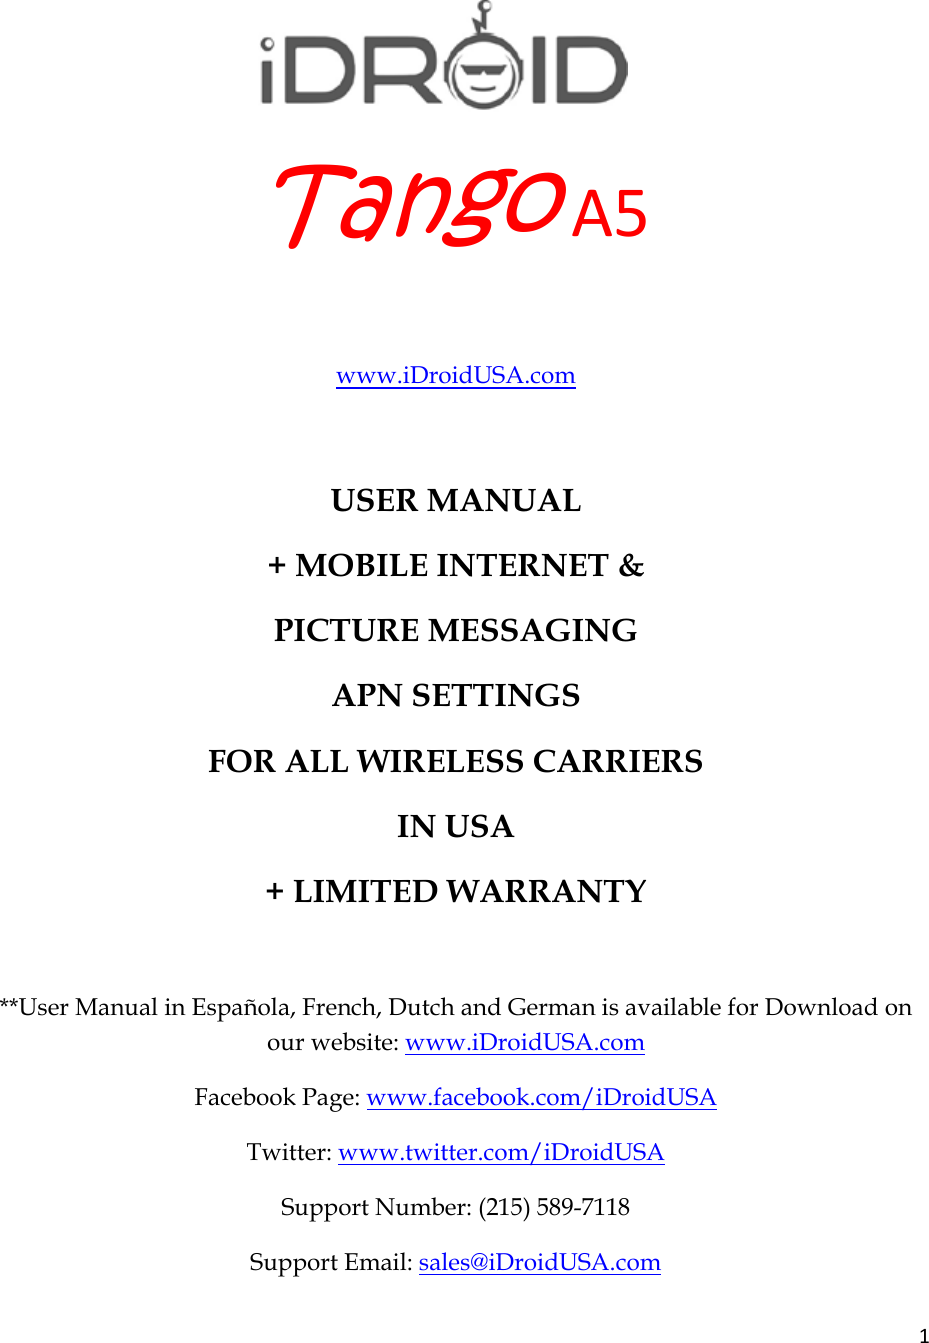 1 TangoA5www.iDroidUSA.com   USER MANUAL + MOBILE INTERNET &amp;  PICTURE MESSAGING  APN SETTINGS  FOR ALL WIRELESS CARRIERS  IN USA + LIMITED WARRANTY  **User Manual in Española, French, Dutch and German is available for Download on our website: www.iDroidUSA.com  Facebook Page: www.facebook.com/iDroidUSA  Twitter: www.twitter.com/iDroidUSA  Support Number: (215) 589-7118 Support Email: sales@iDroidUSA.com  